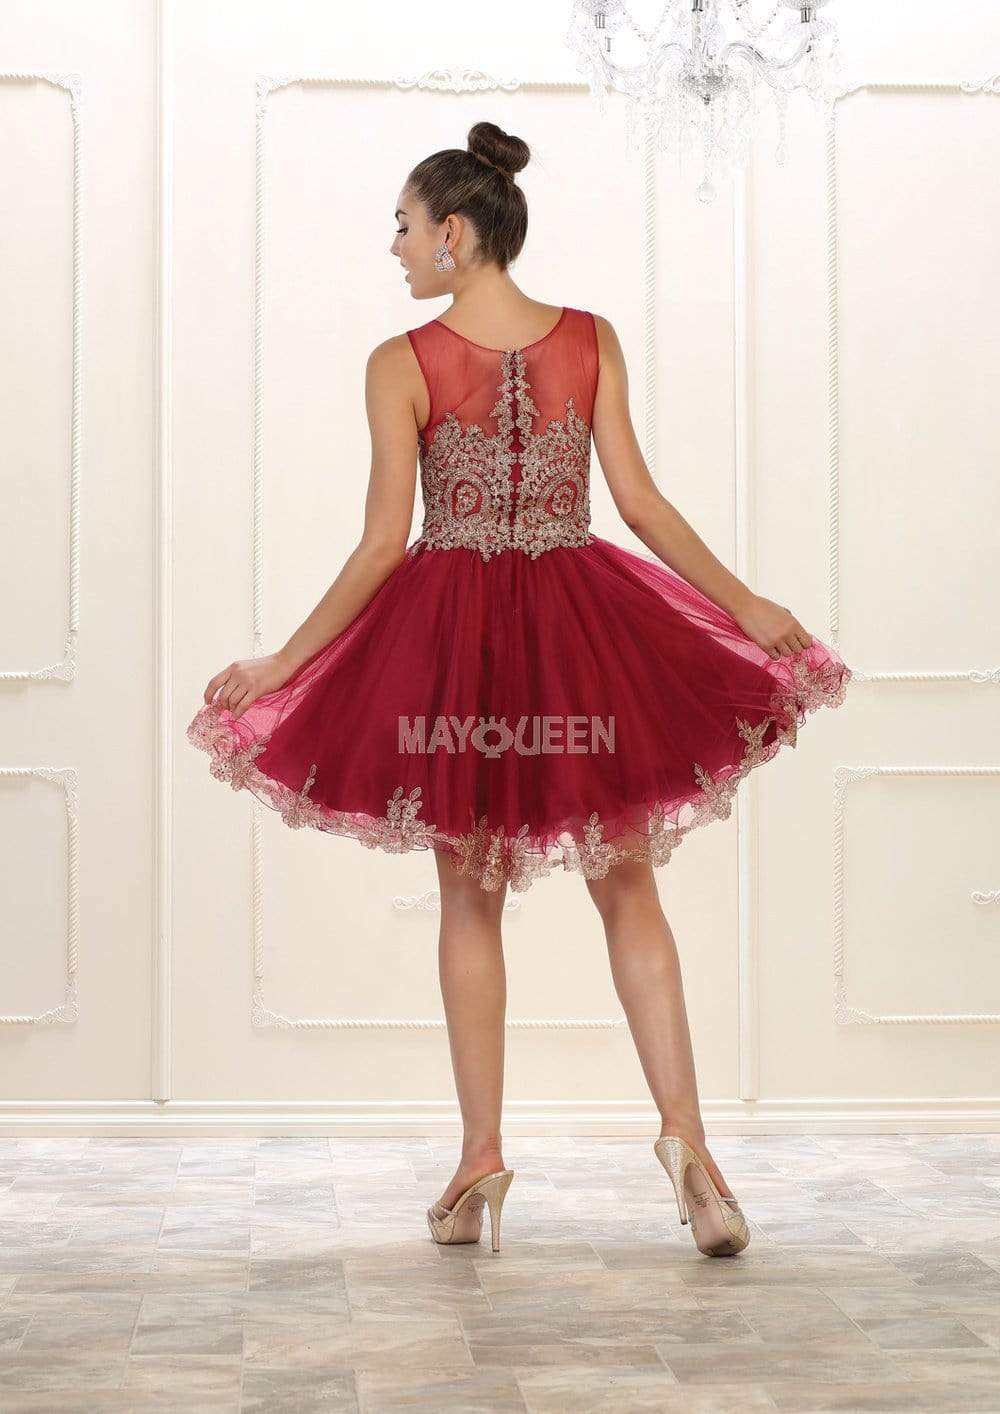 May Queen - MQ1434 Illusion Neckline Lace Applique Cocktail Dress Homecoming Dresses